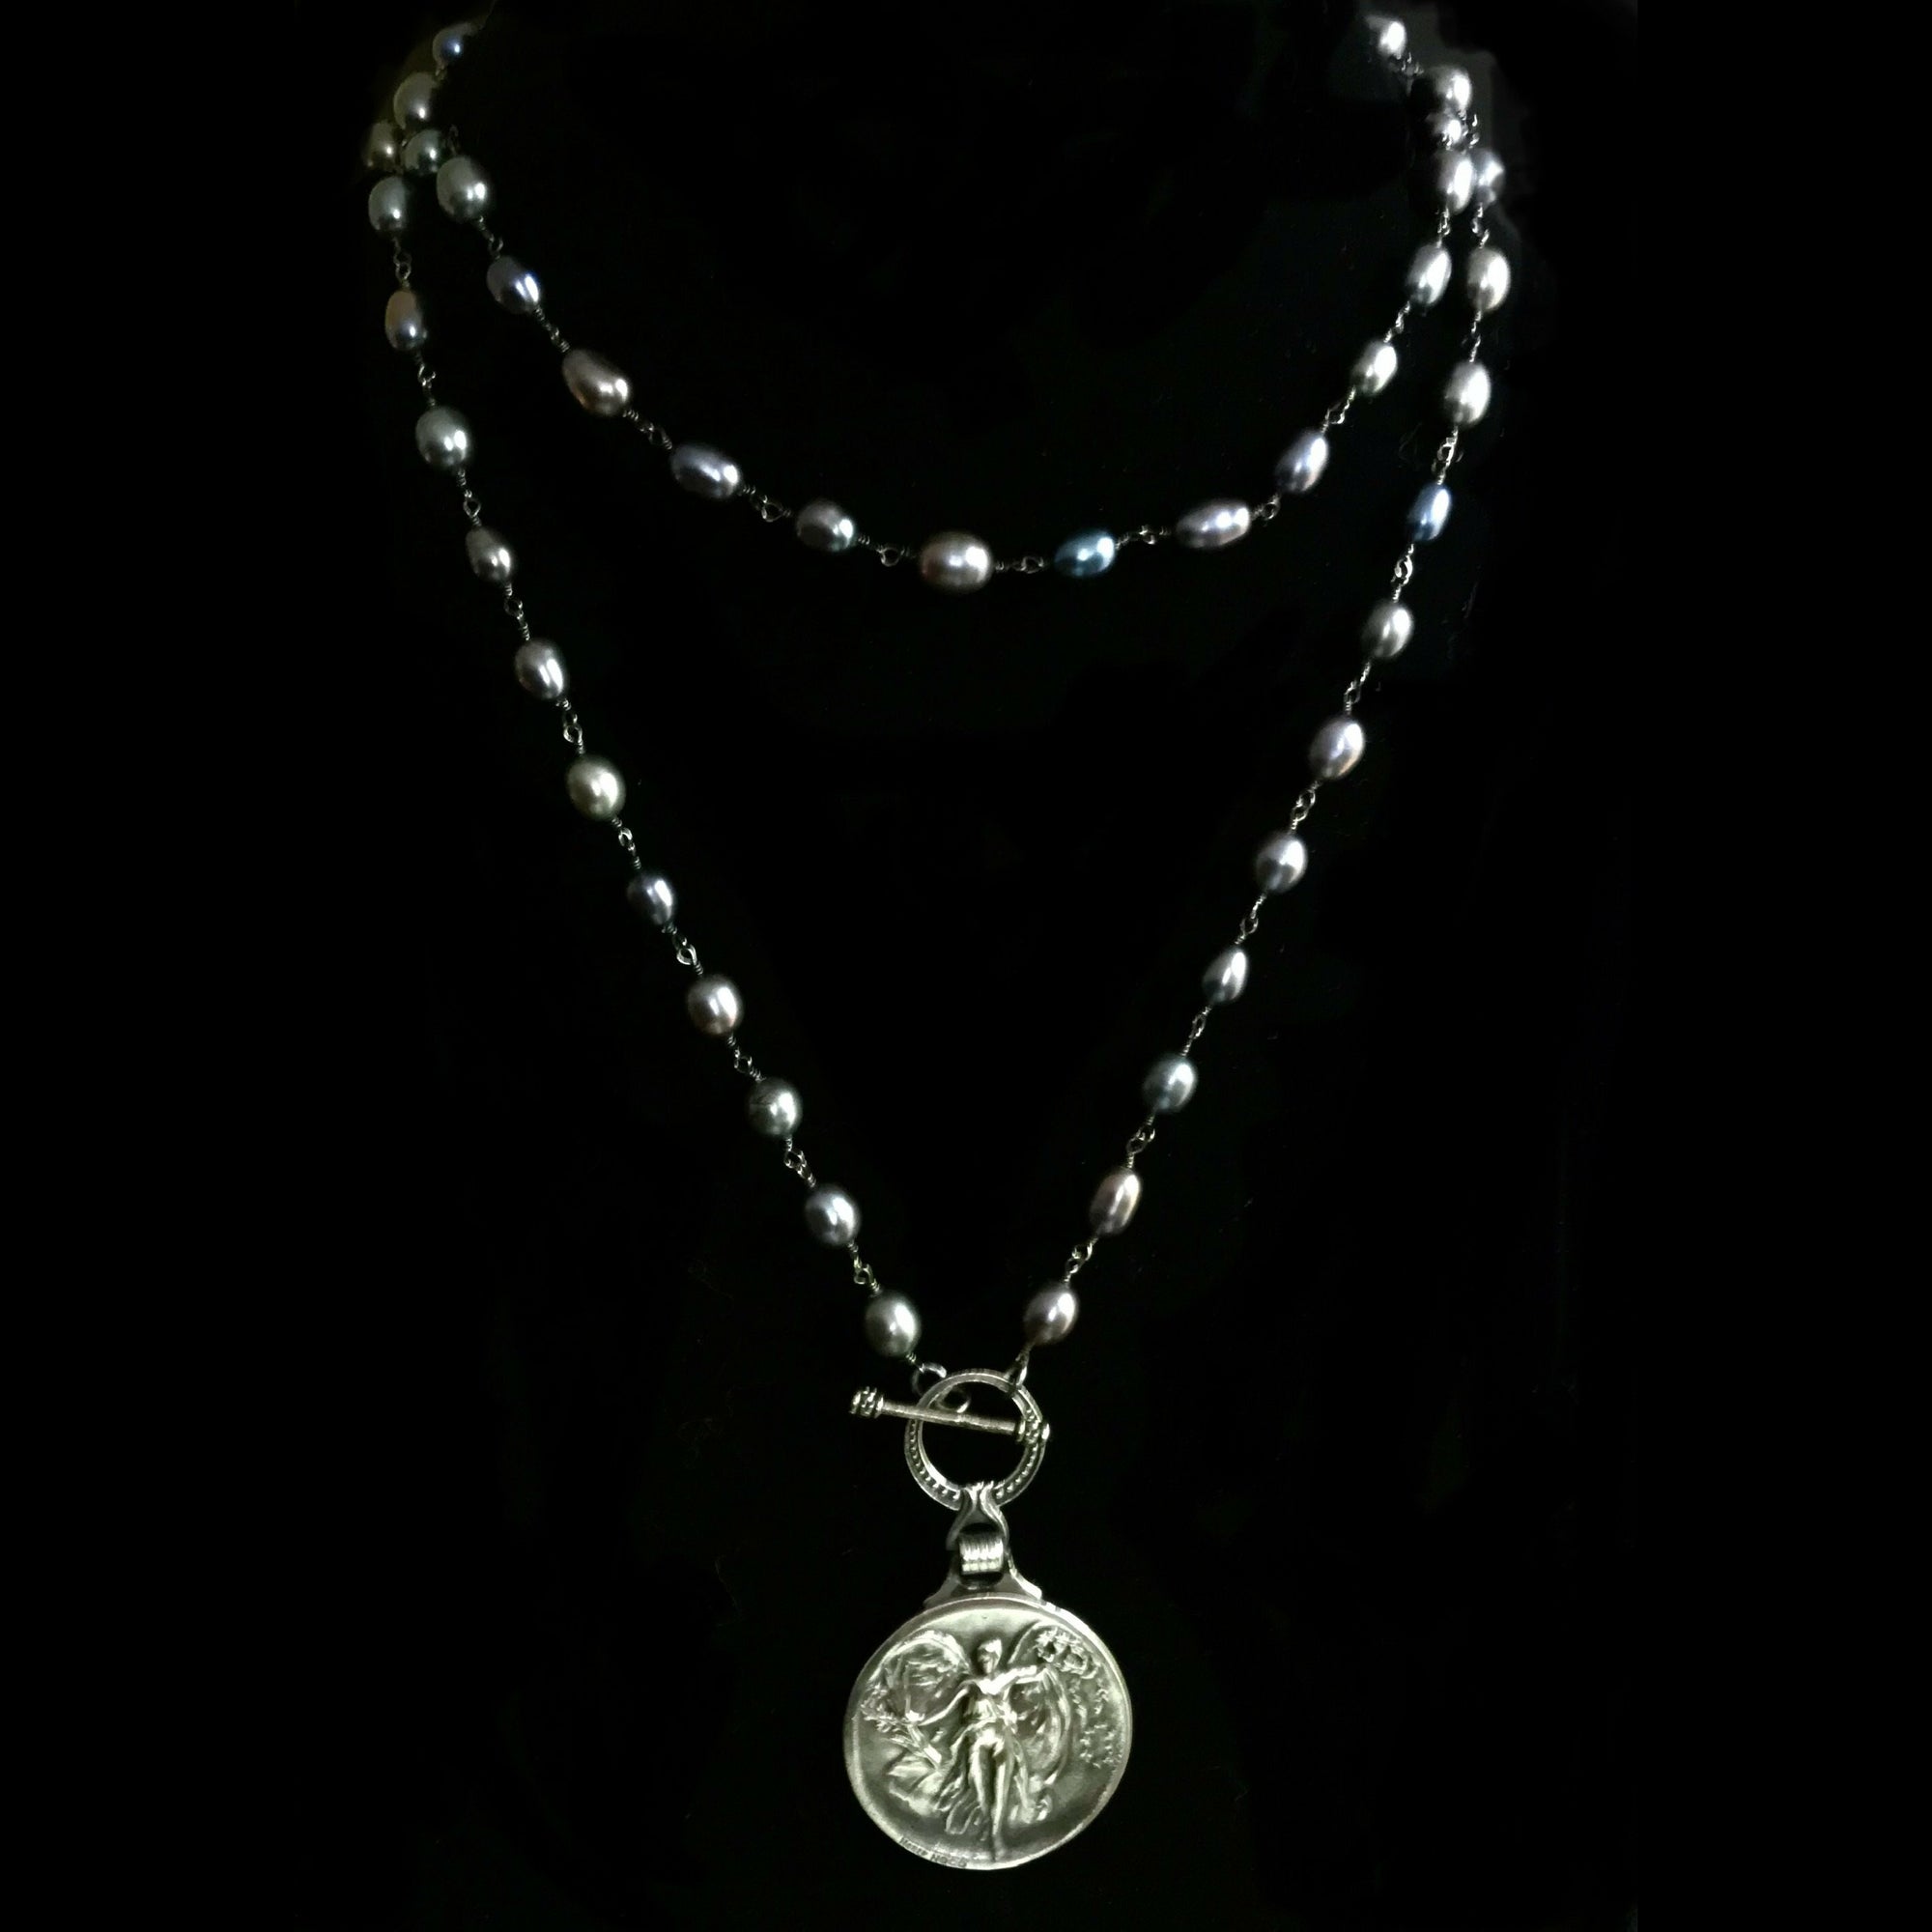 Nike the Greek Goddess of Victory Peacock Pearl Necklace